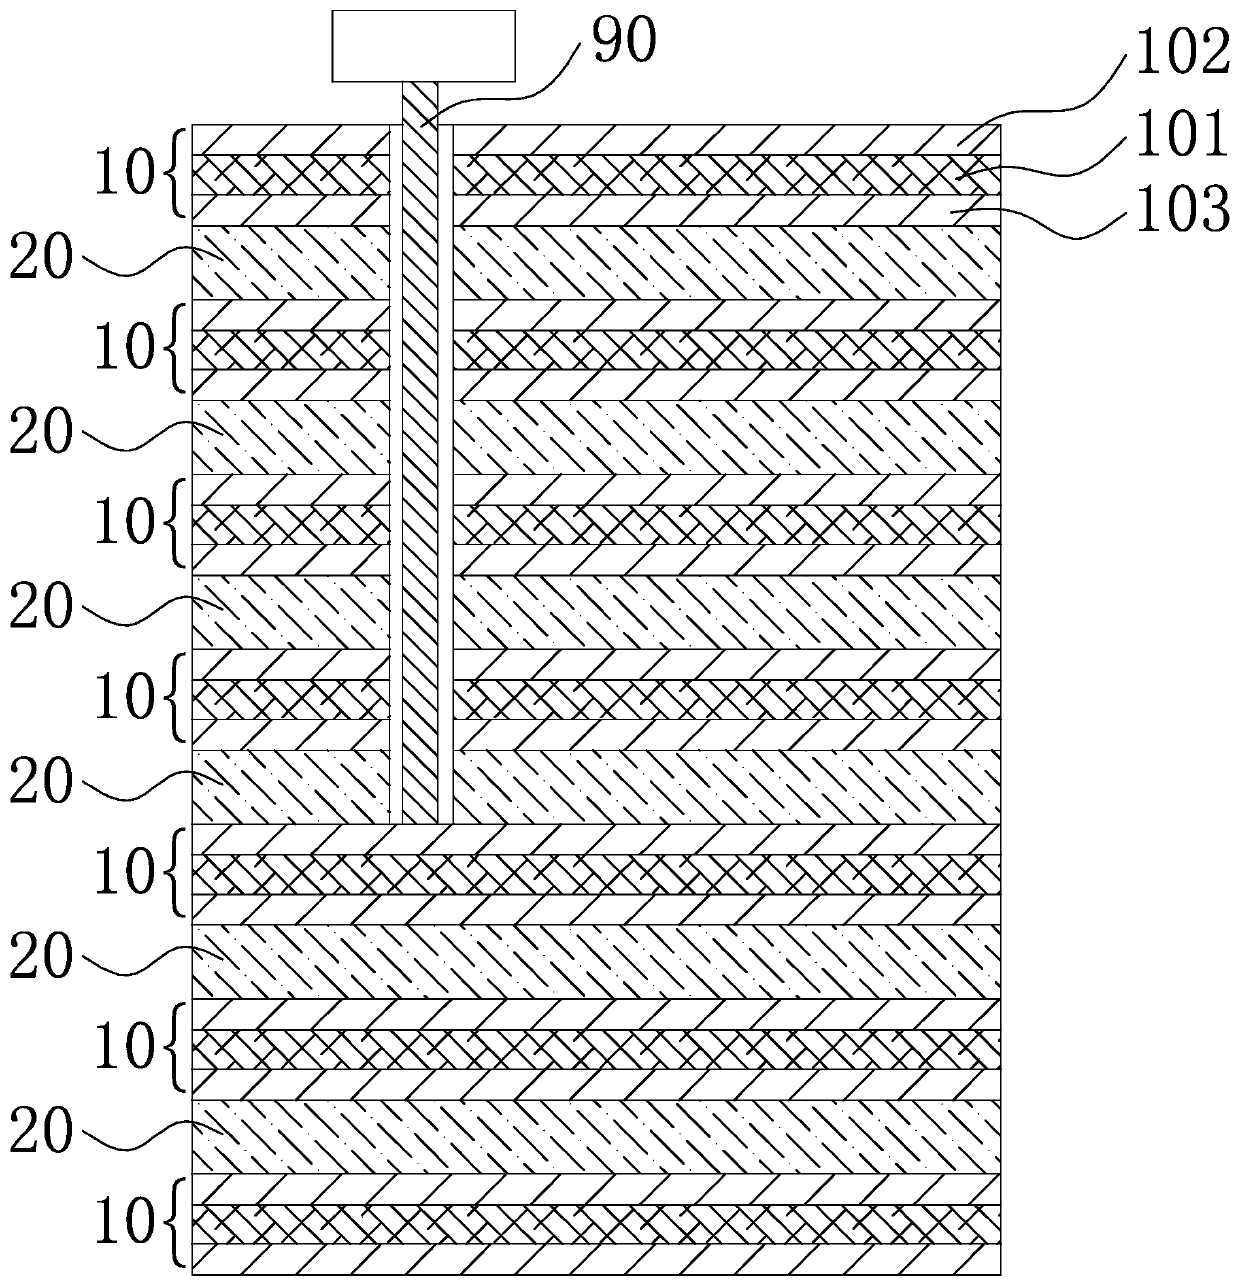 Blind hole processing method for multilayer printed board